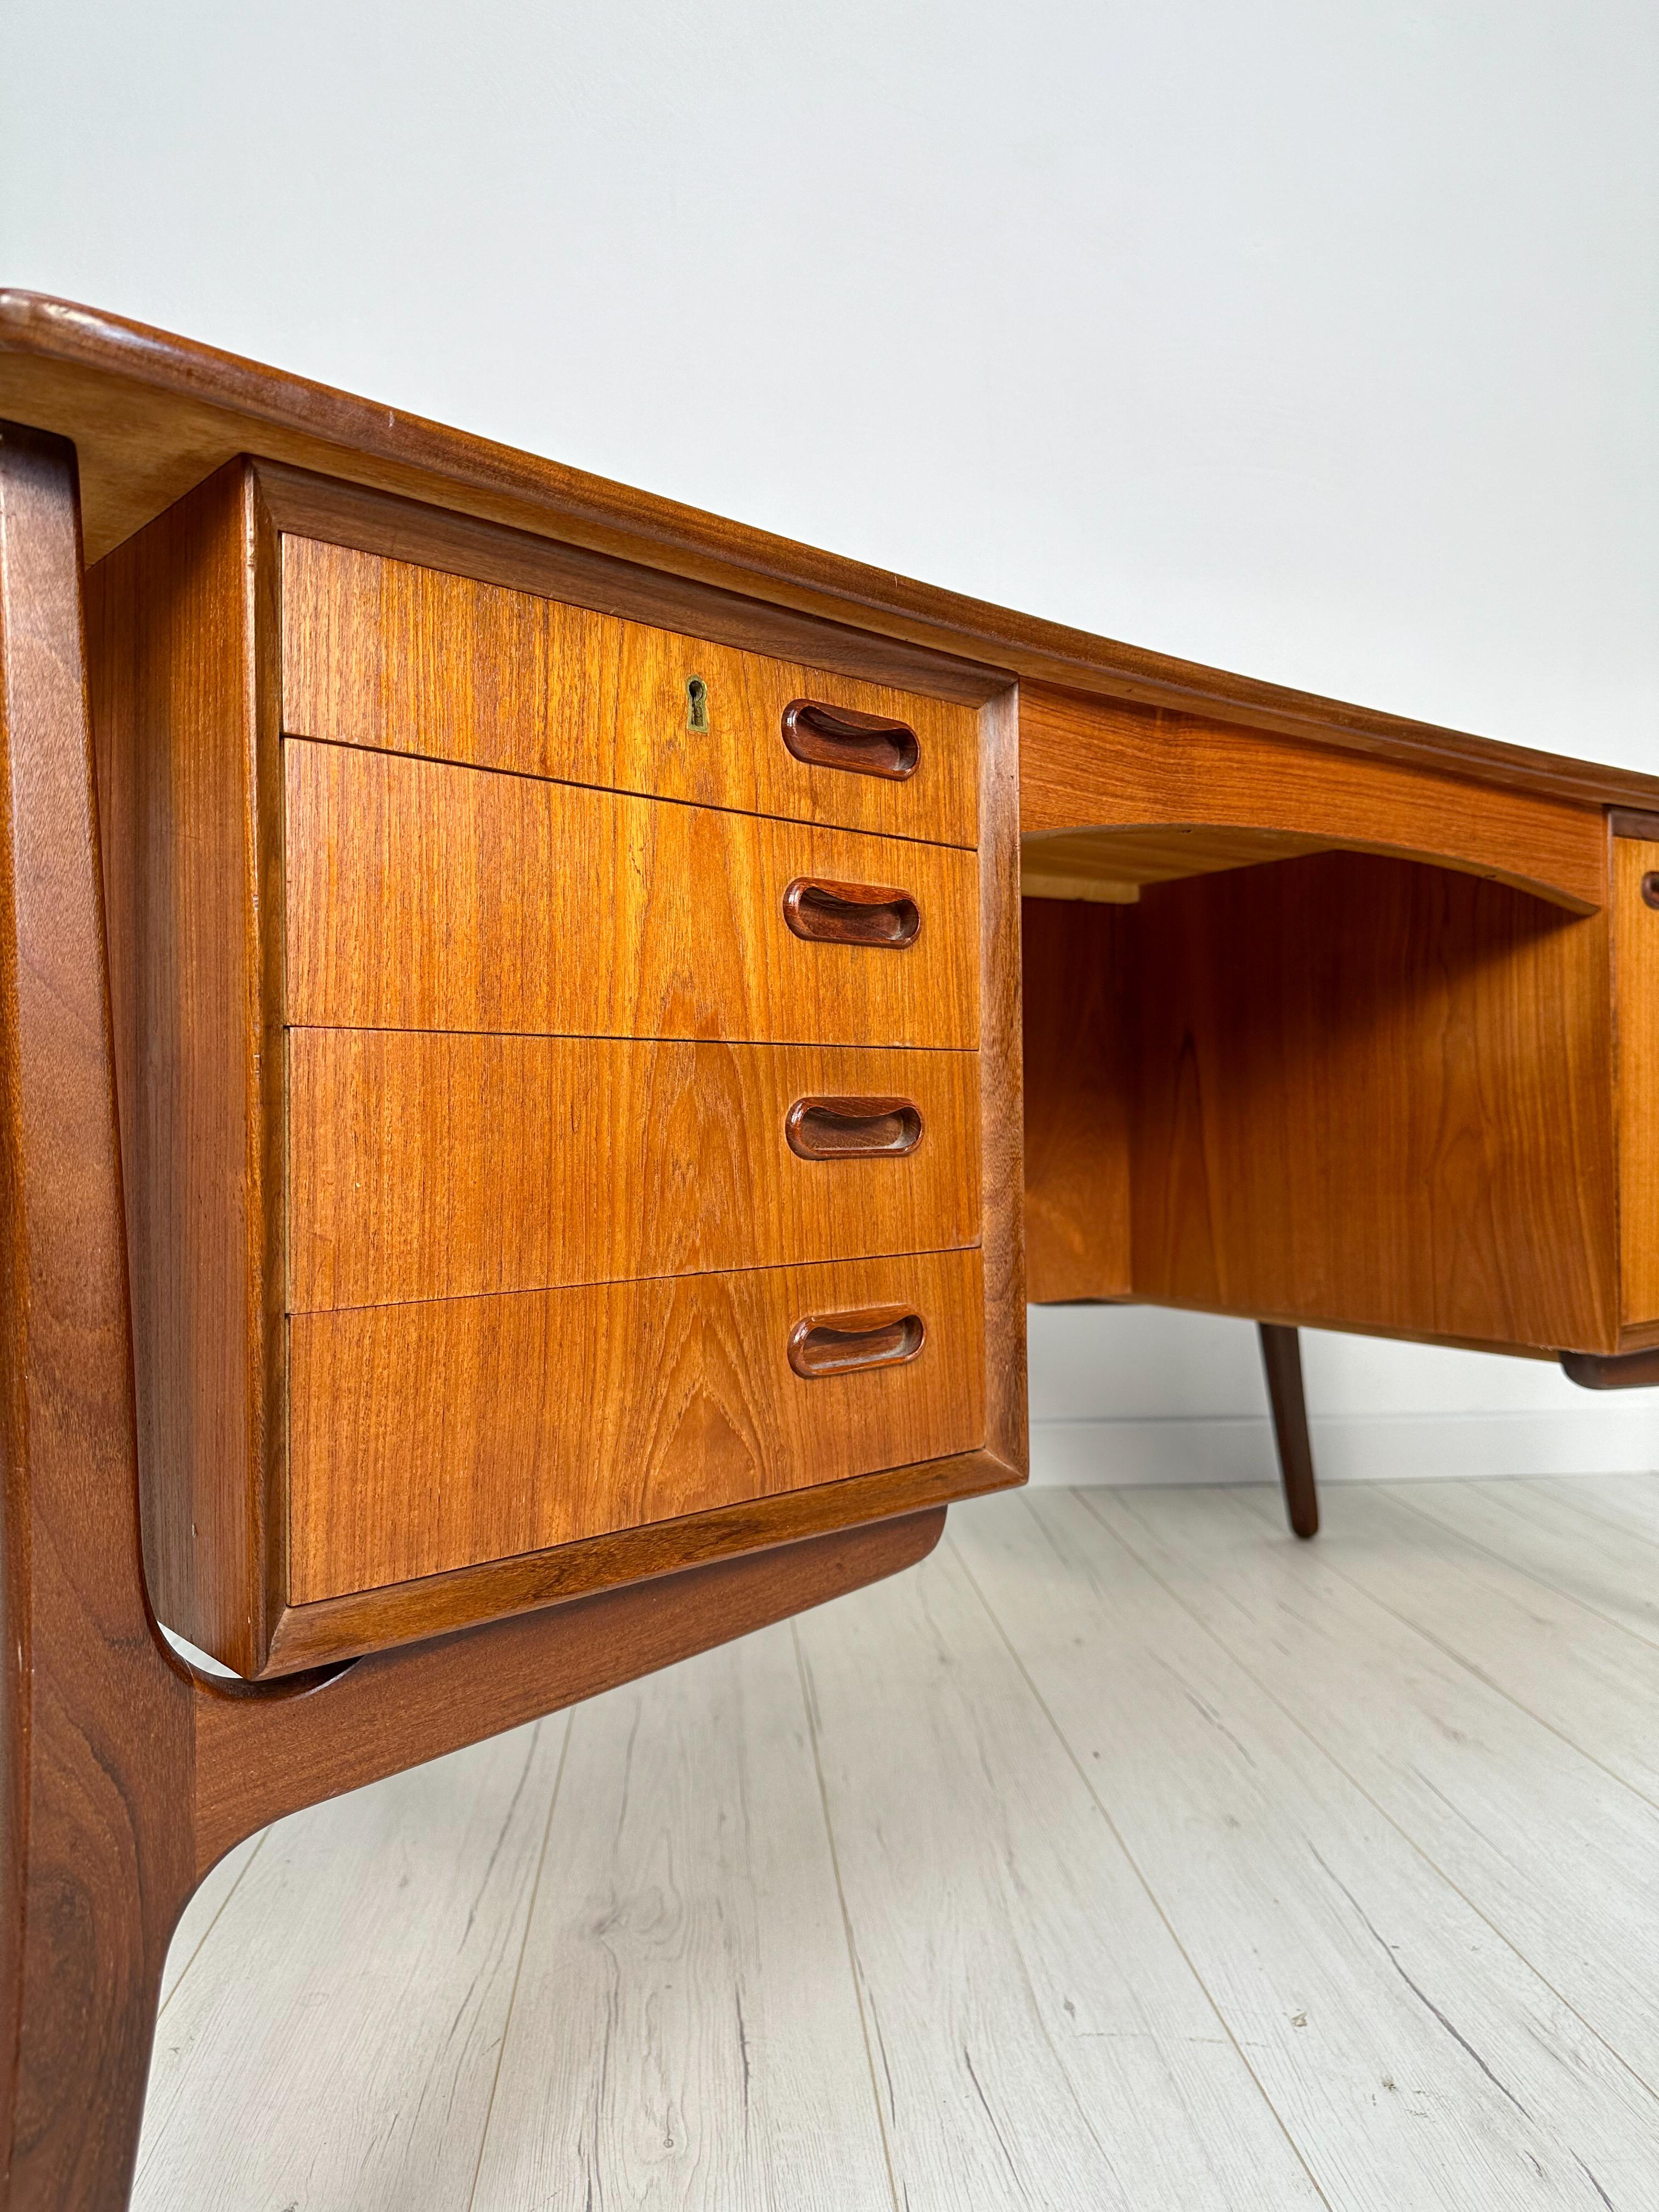 Beautiful vintage bow-fronted writing desk original from the 1960s featuring 5 drawers with backside shelving for additional storage space. High-quality teak wood. Designed by Svend Aage Madsen for H.P. Hansen, made in Denmark. Neat condition with